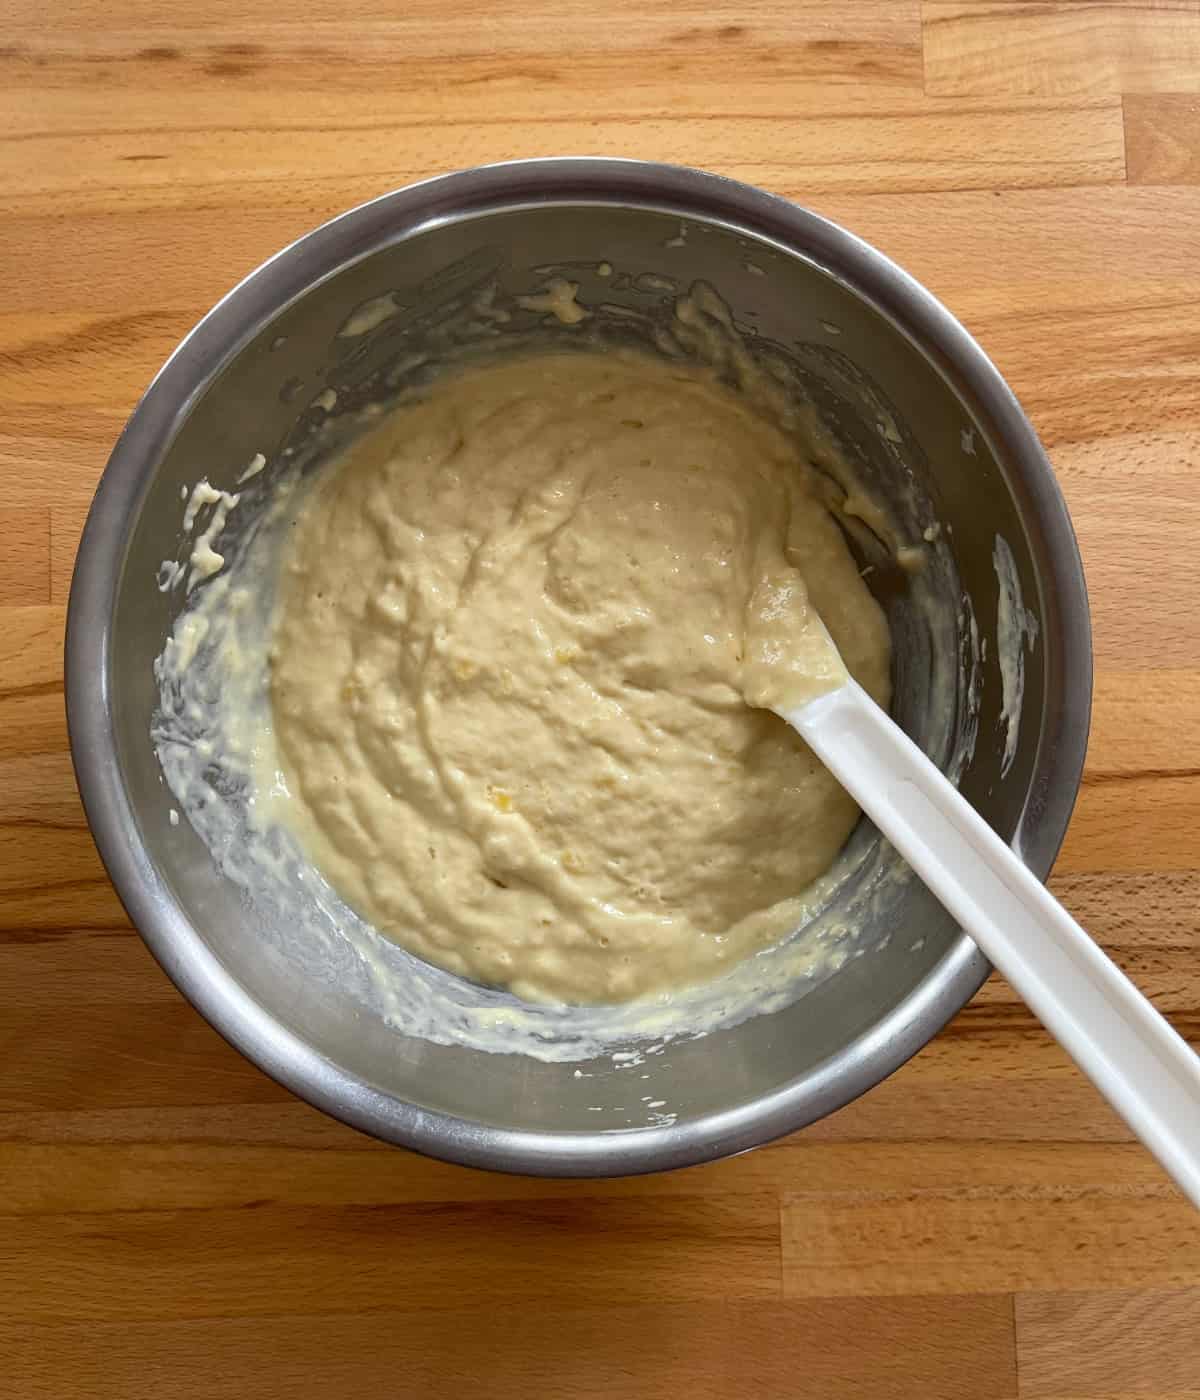 Mixing skillet pancake batter in mixing bowl with spatula on wooden table.